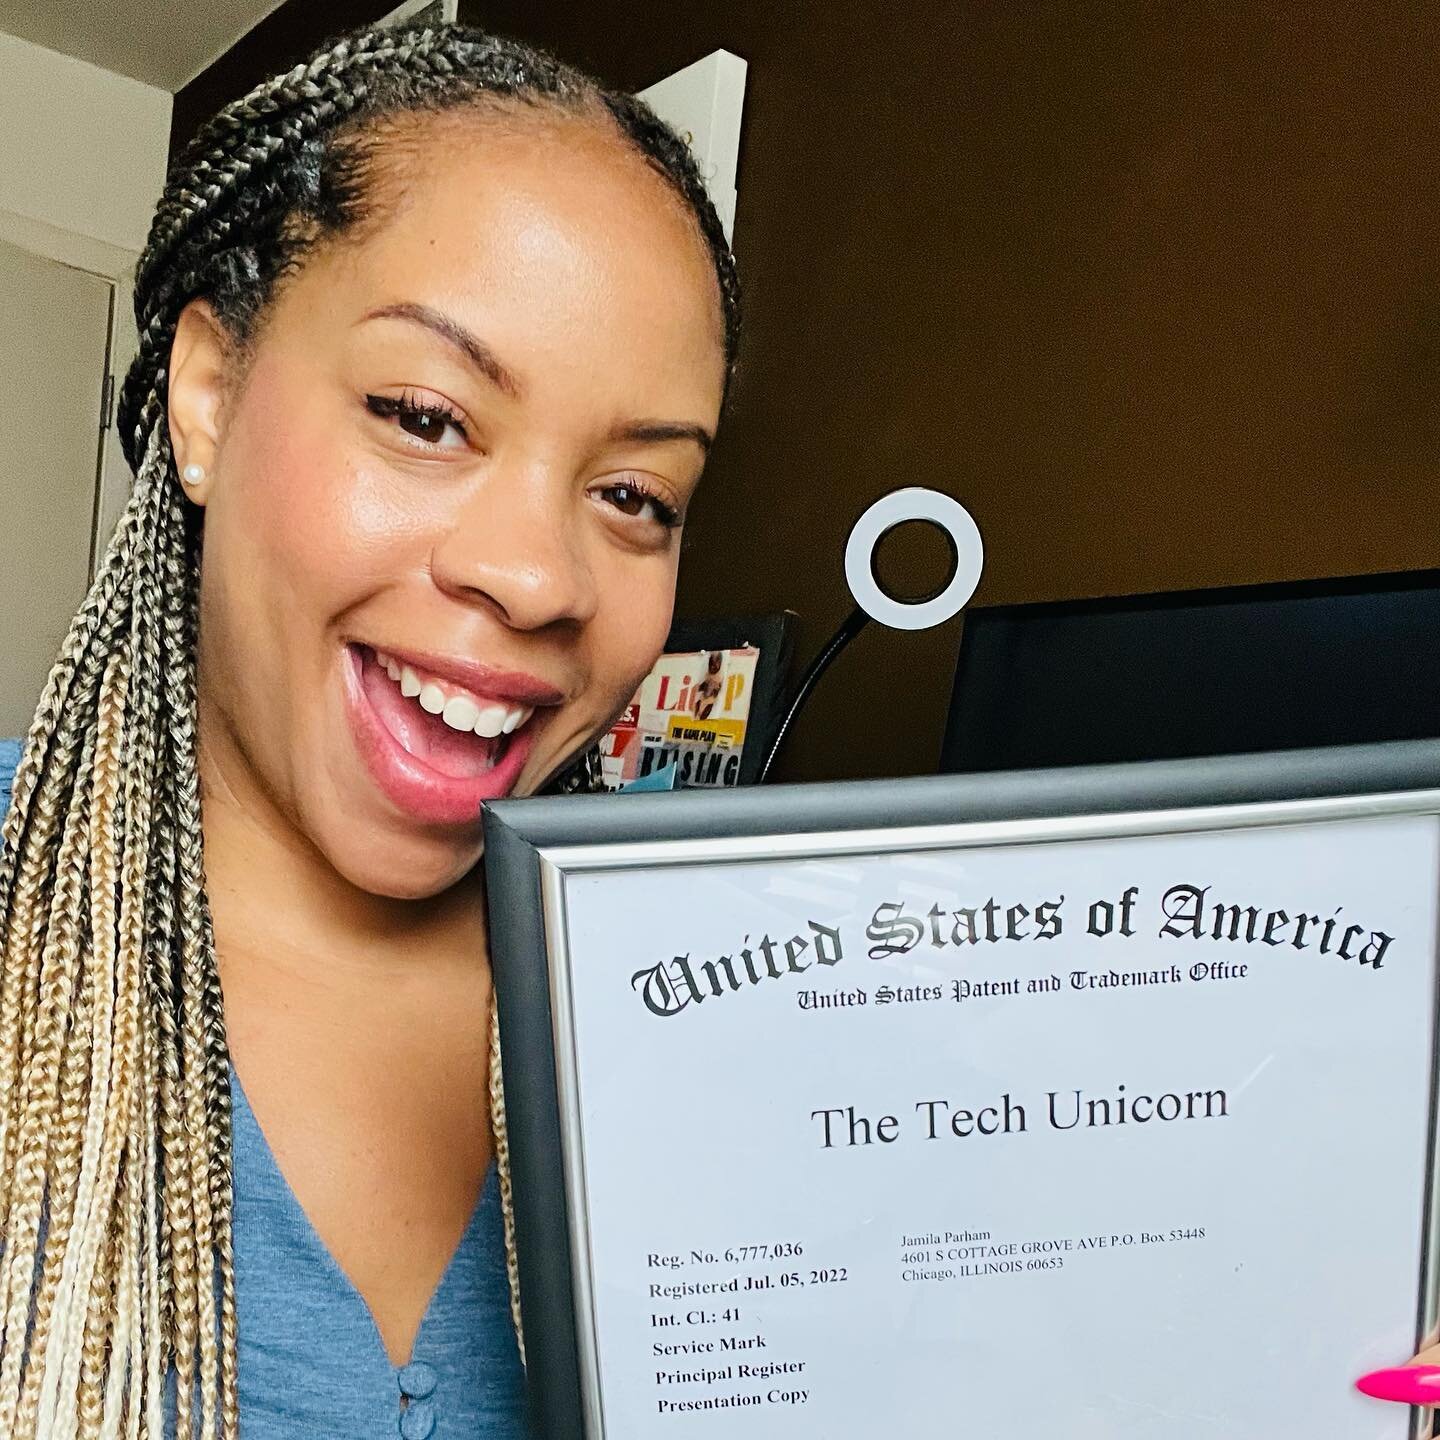 🦄✨ I officially OWN my mark in all 50 states! The Tech Unicorn 👩🏽&zwj;💻🦄✨ is now a registered mark with USPTO! A one year process that took nearly 5 longggg years. This was very personal for me since I&rsquo;ve invested so much in my brand.. I l